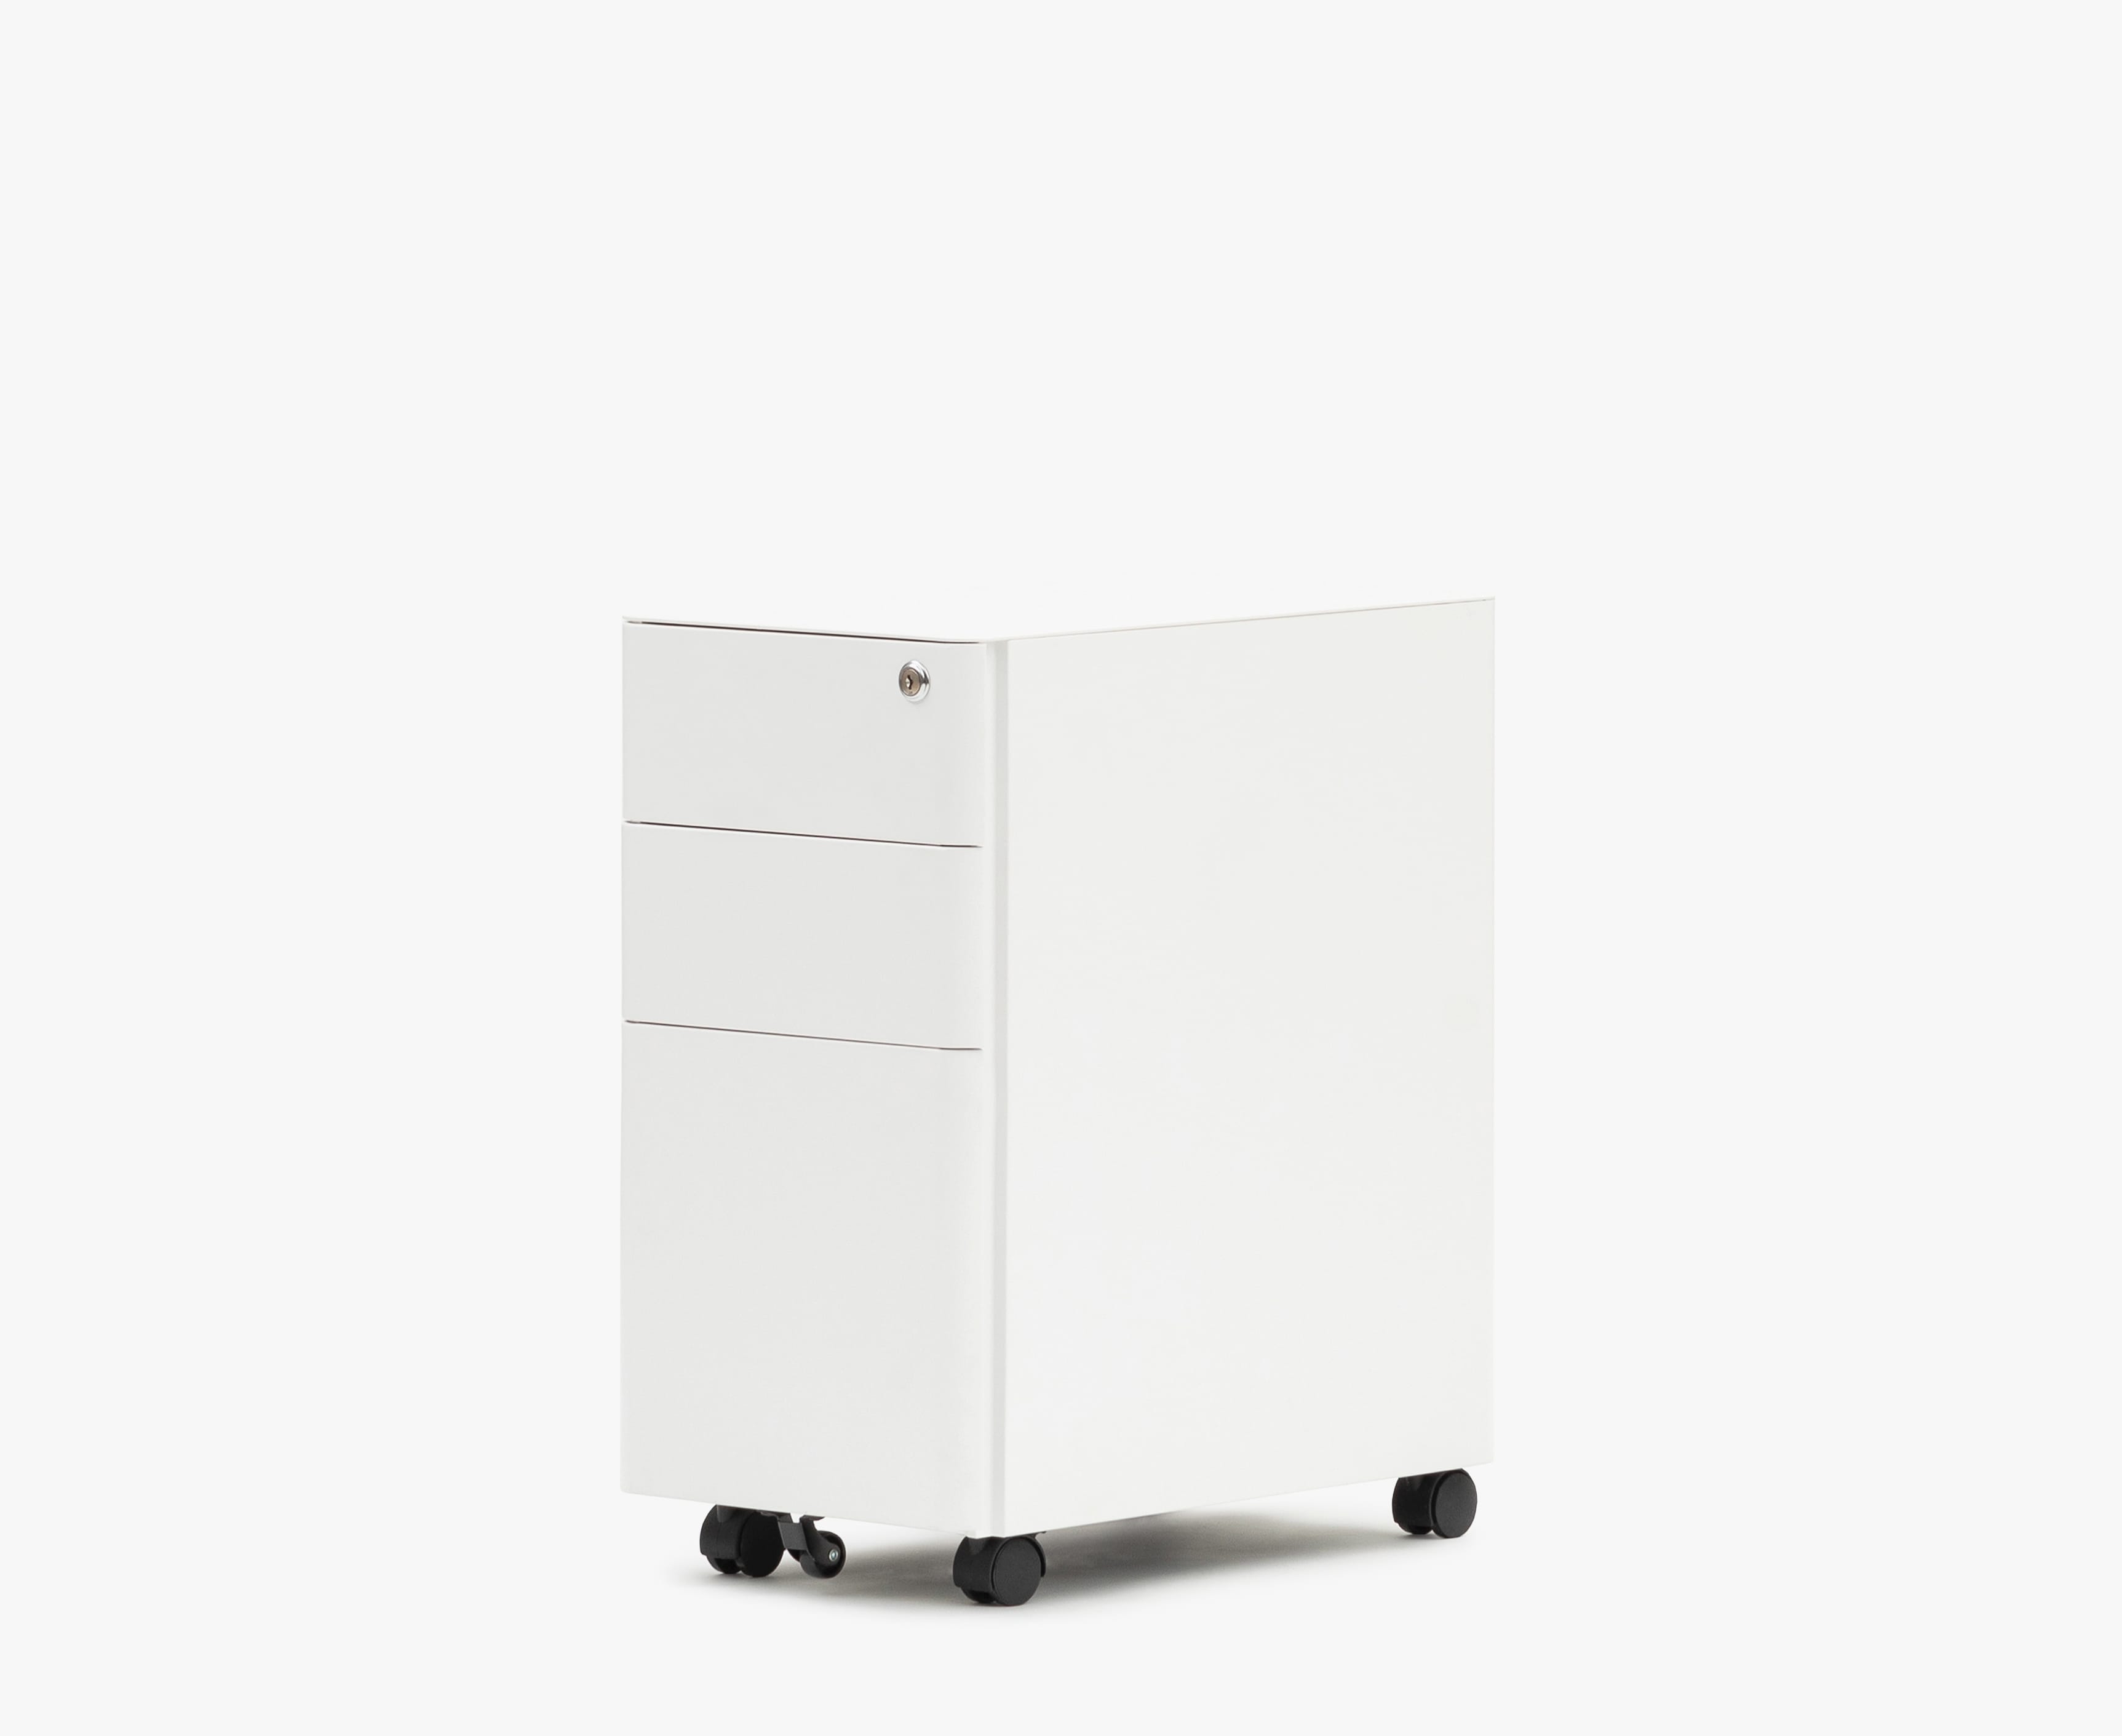 The Linea filing cabinet